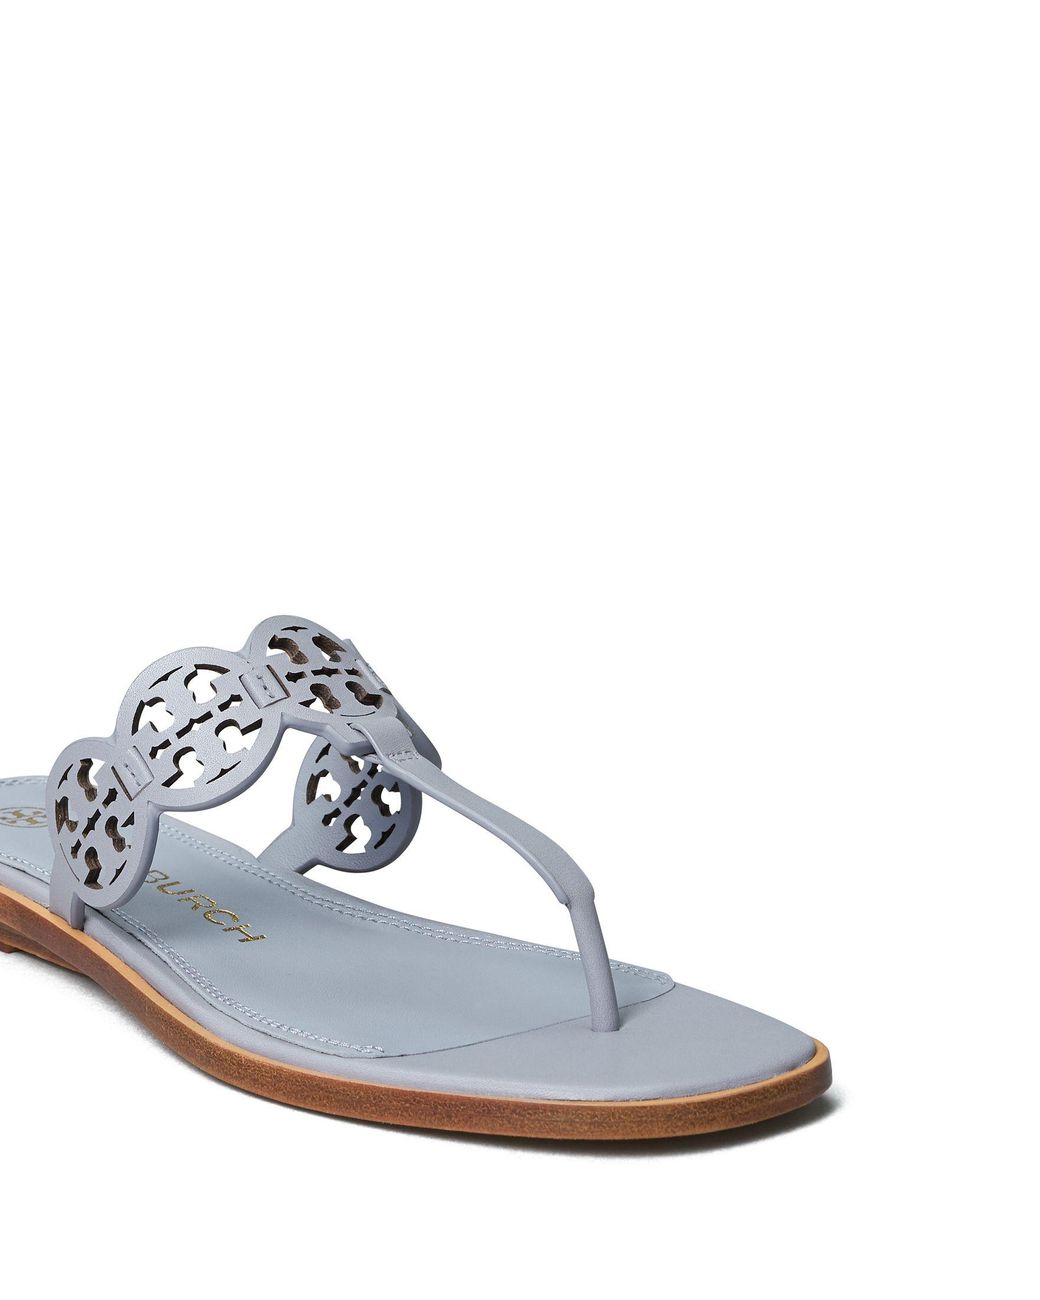 Tory Burch Tiny Miller Thong Sandal, Leather in Cloud Blue (Blue) - Lyst